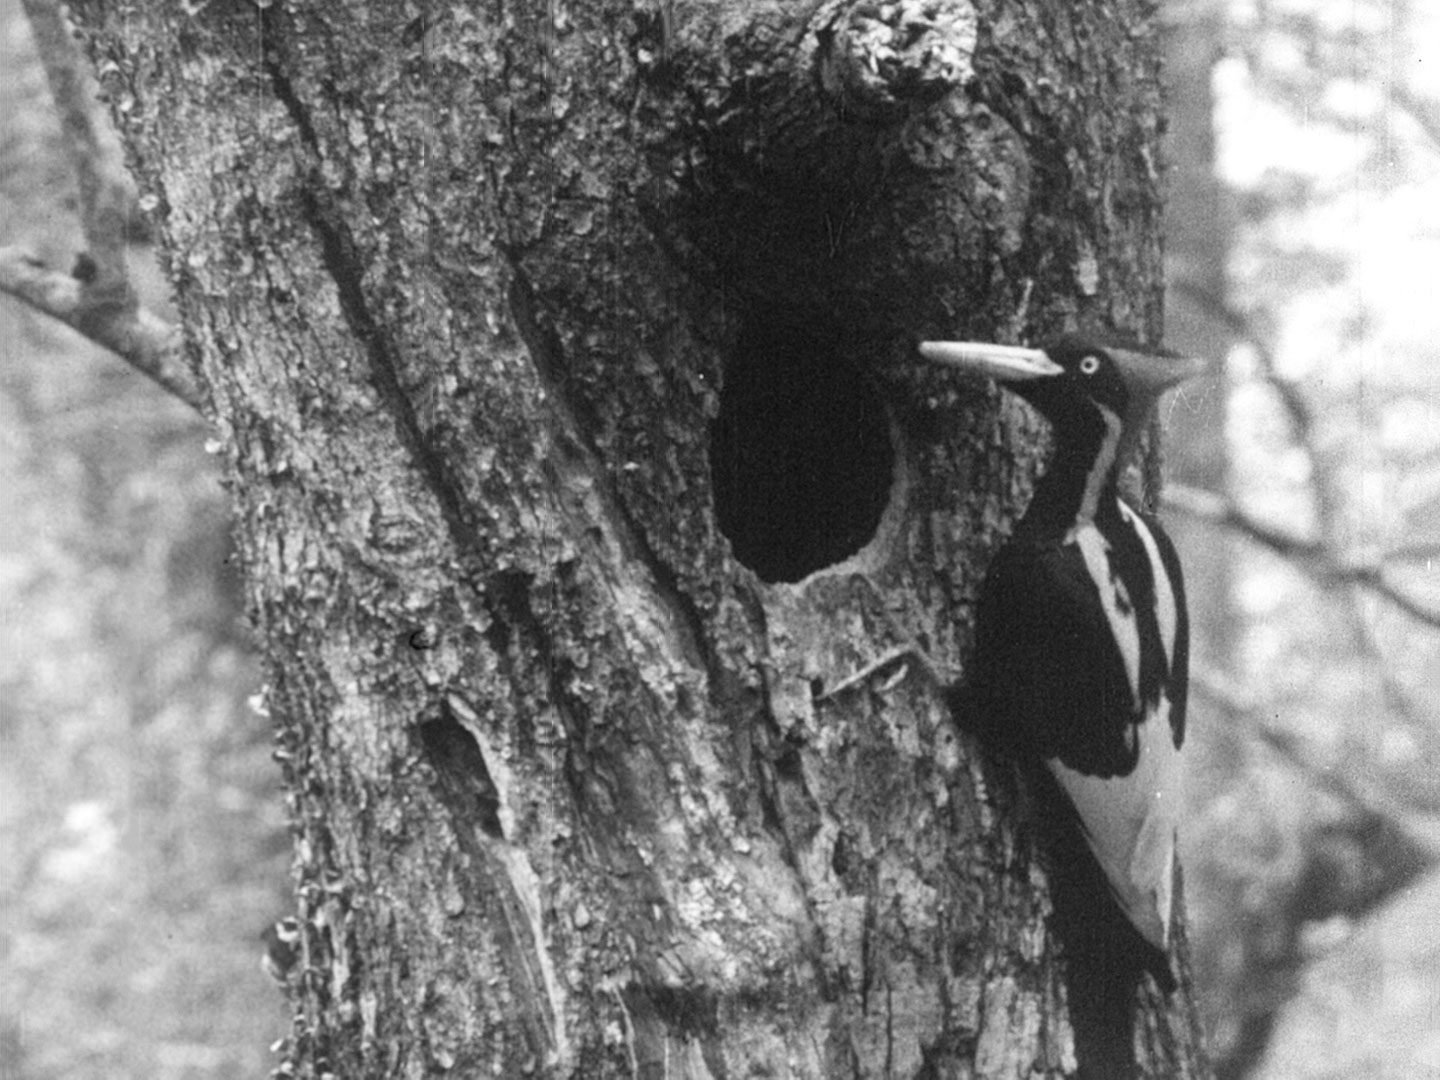 One of the only photos of the Ivory-billed Woodpecker, taken by the Cornell Lab's founder, Arthur Allen in 1935. It is now in the Macaulay Library.